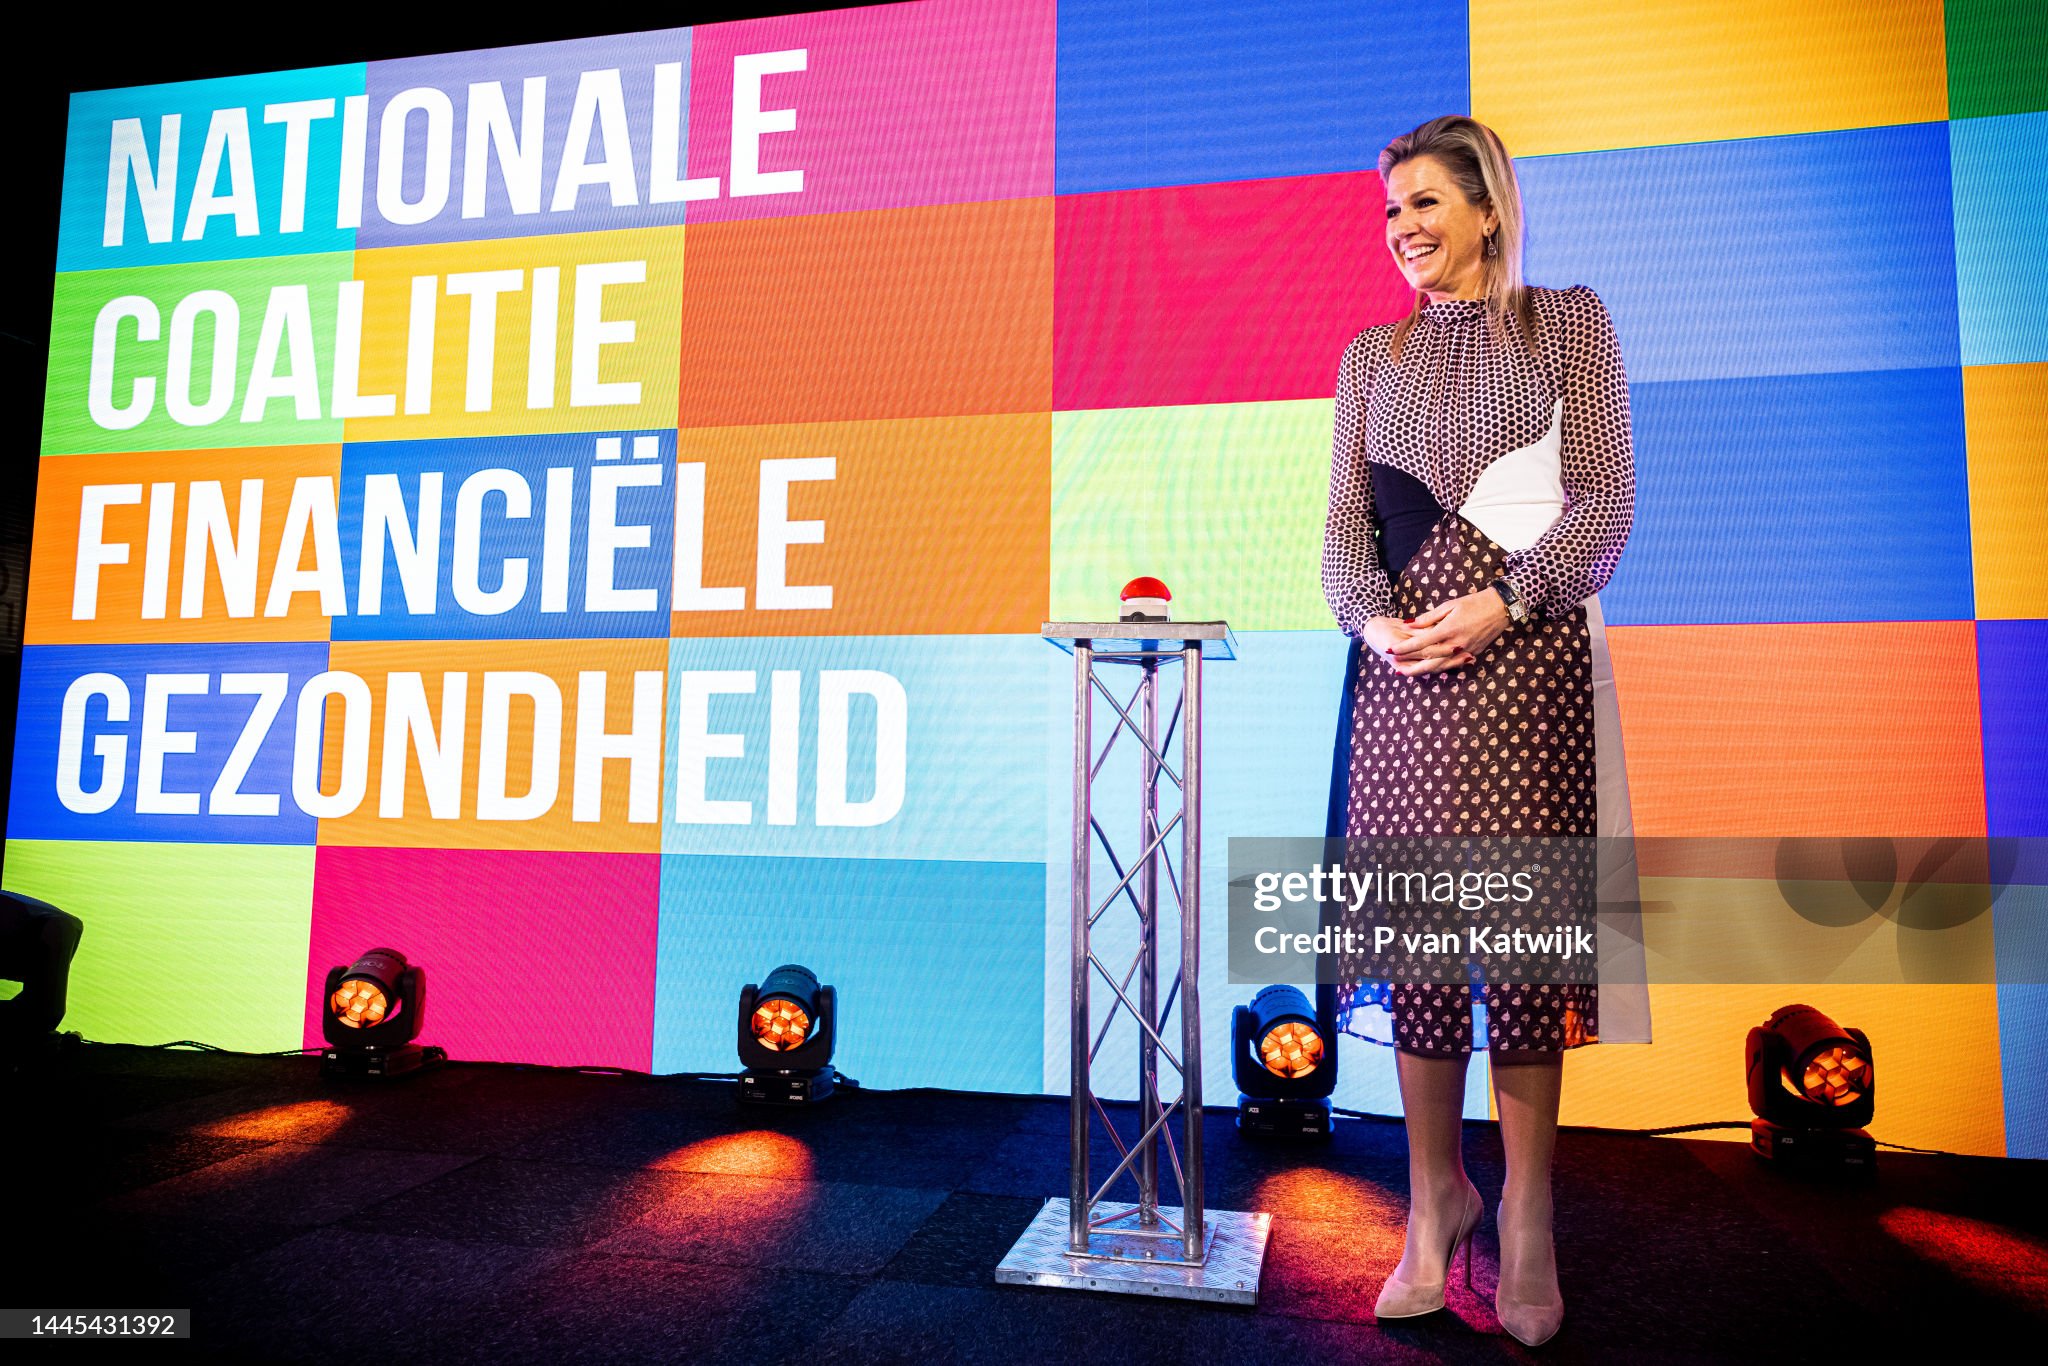 queen-maxima-of-the-netherlands-attends-the-national-launch-of-coalition-financial-health.jpg?s=2048x2048&w=gi&k=20&c=dMCtUmTNIWLAqXpWxMQ8u0cG4f_jv9lOQLsaw2tF1ww=